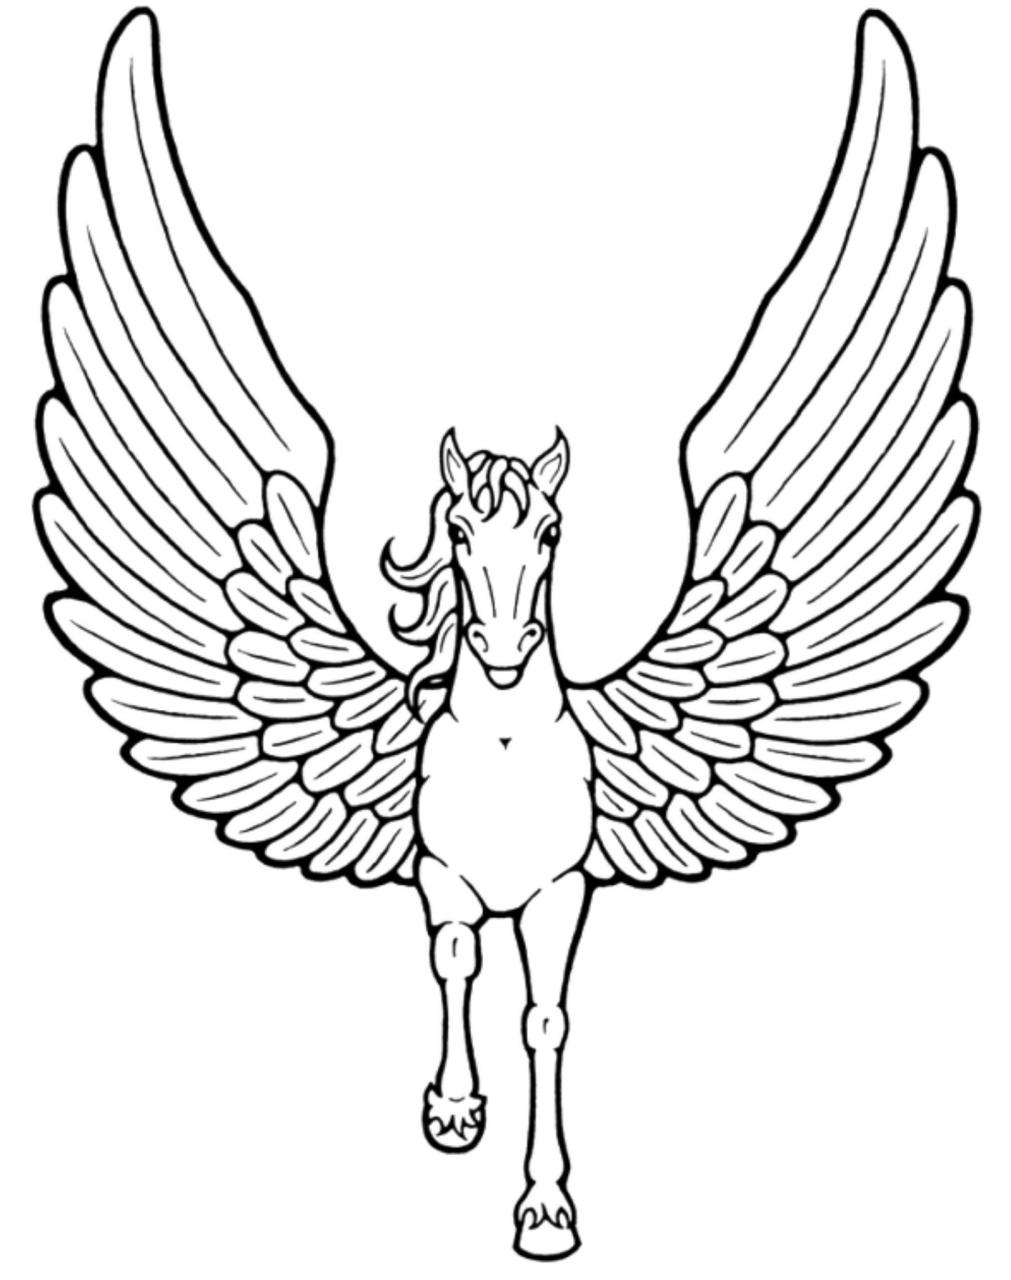 Print & Download Unicorn Coloring Pages for Children